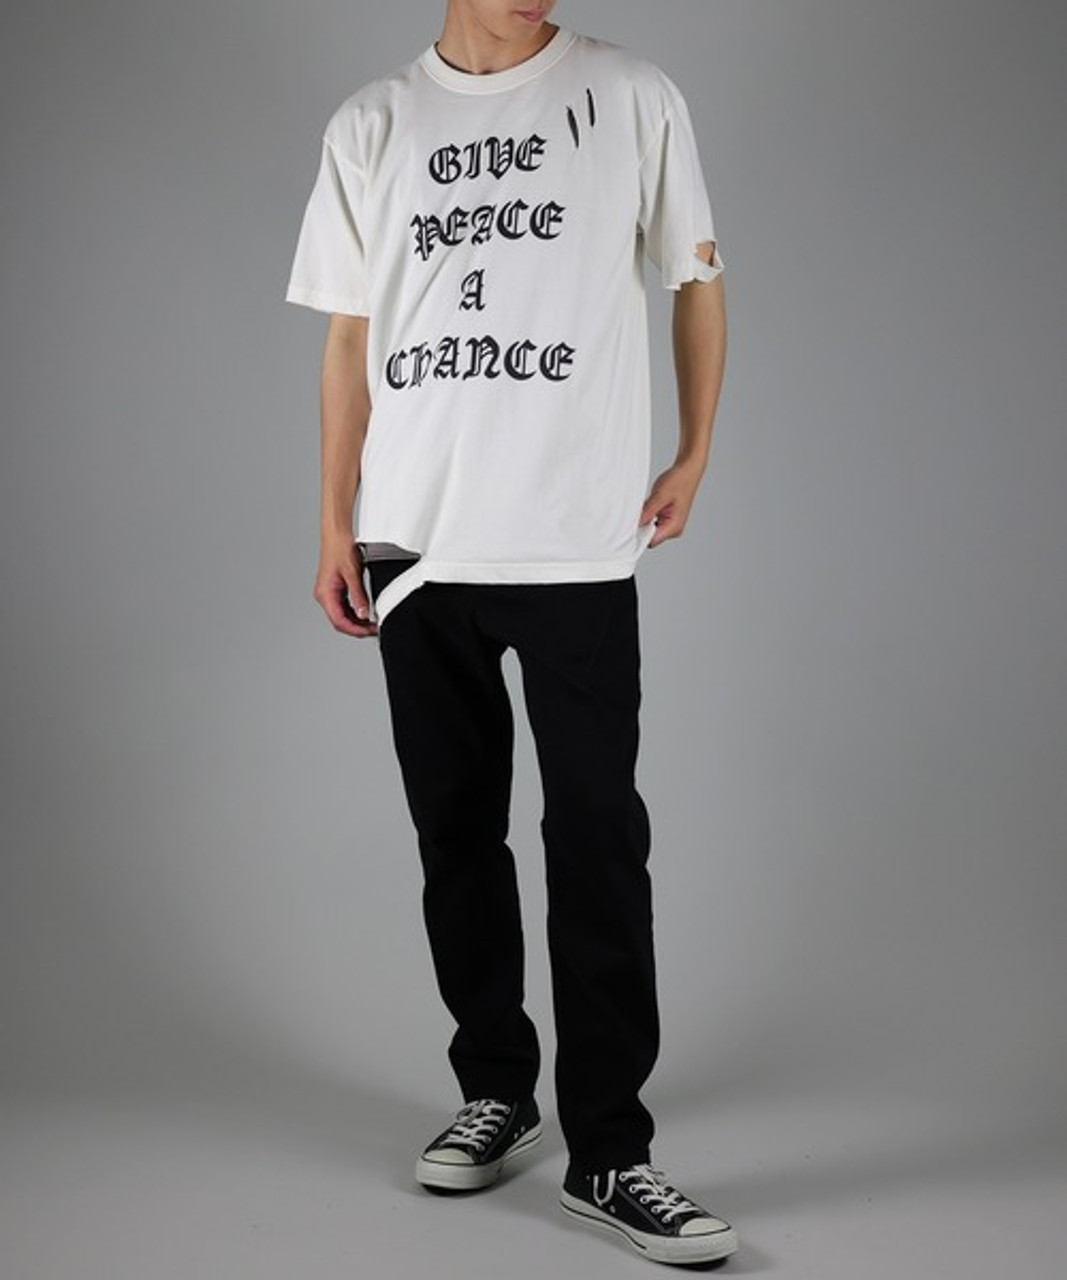 GIVE PEACE A CHANCE DAMAGE T-SHIRT S22NT004